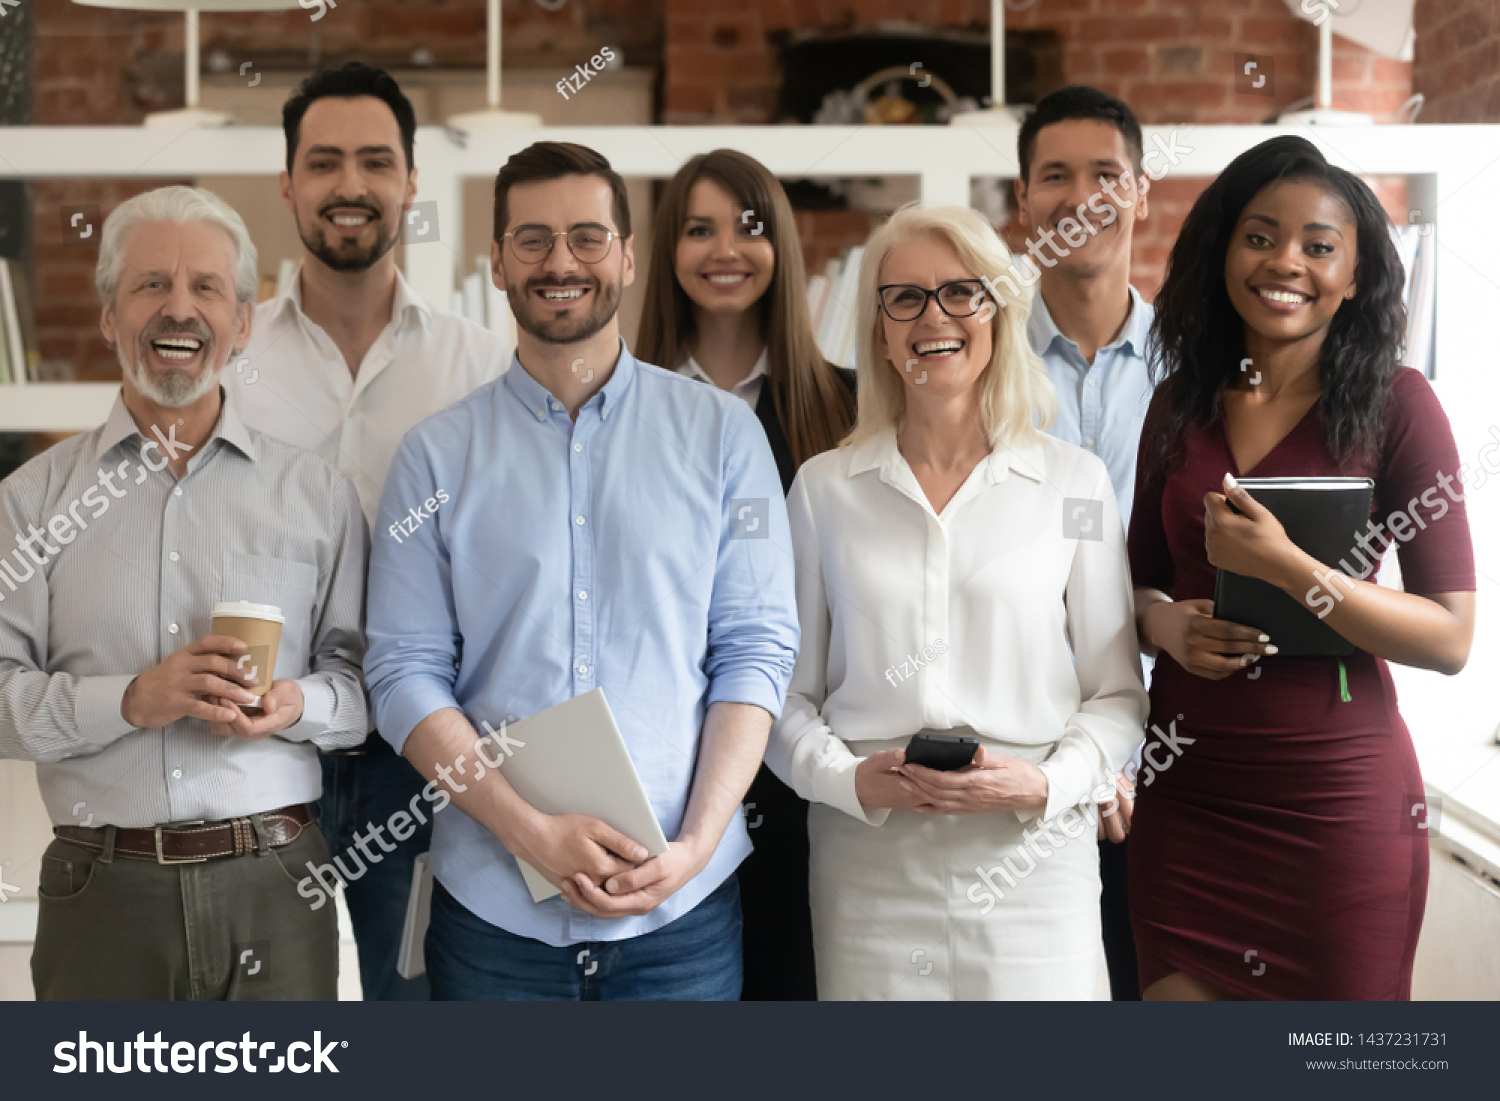 Happy diverse professional business team stand in office looking at camera, smiling young and old multiracial workers staff group pose together as human resource, corporate equality concept, portrait #1437231731